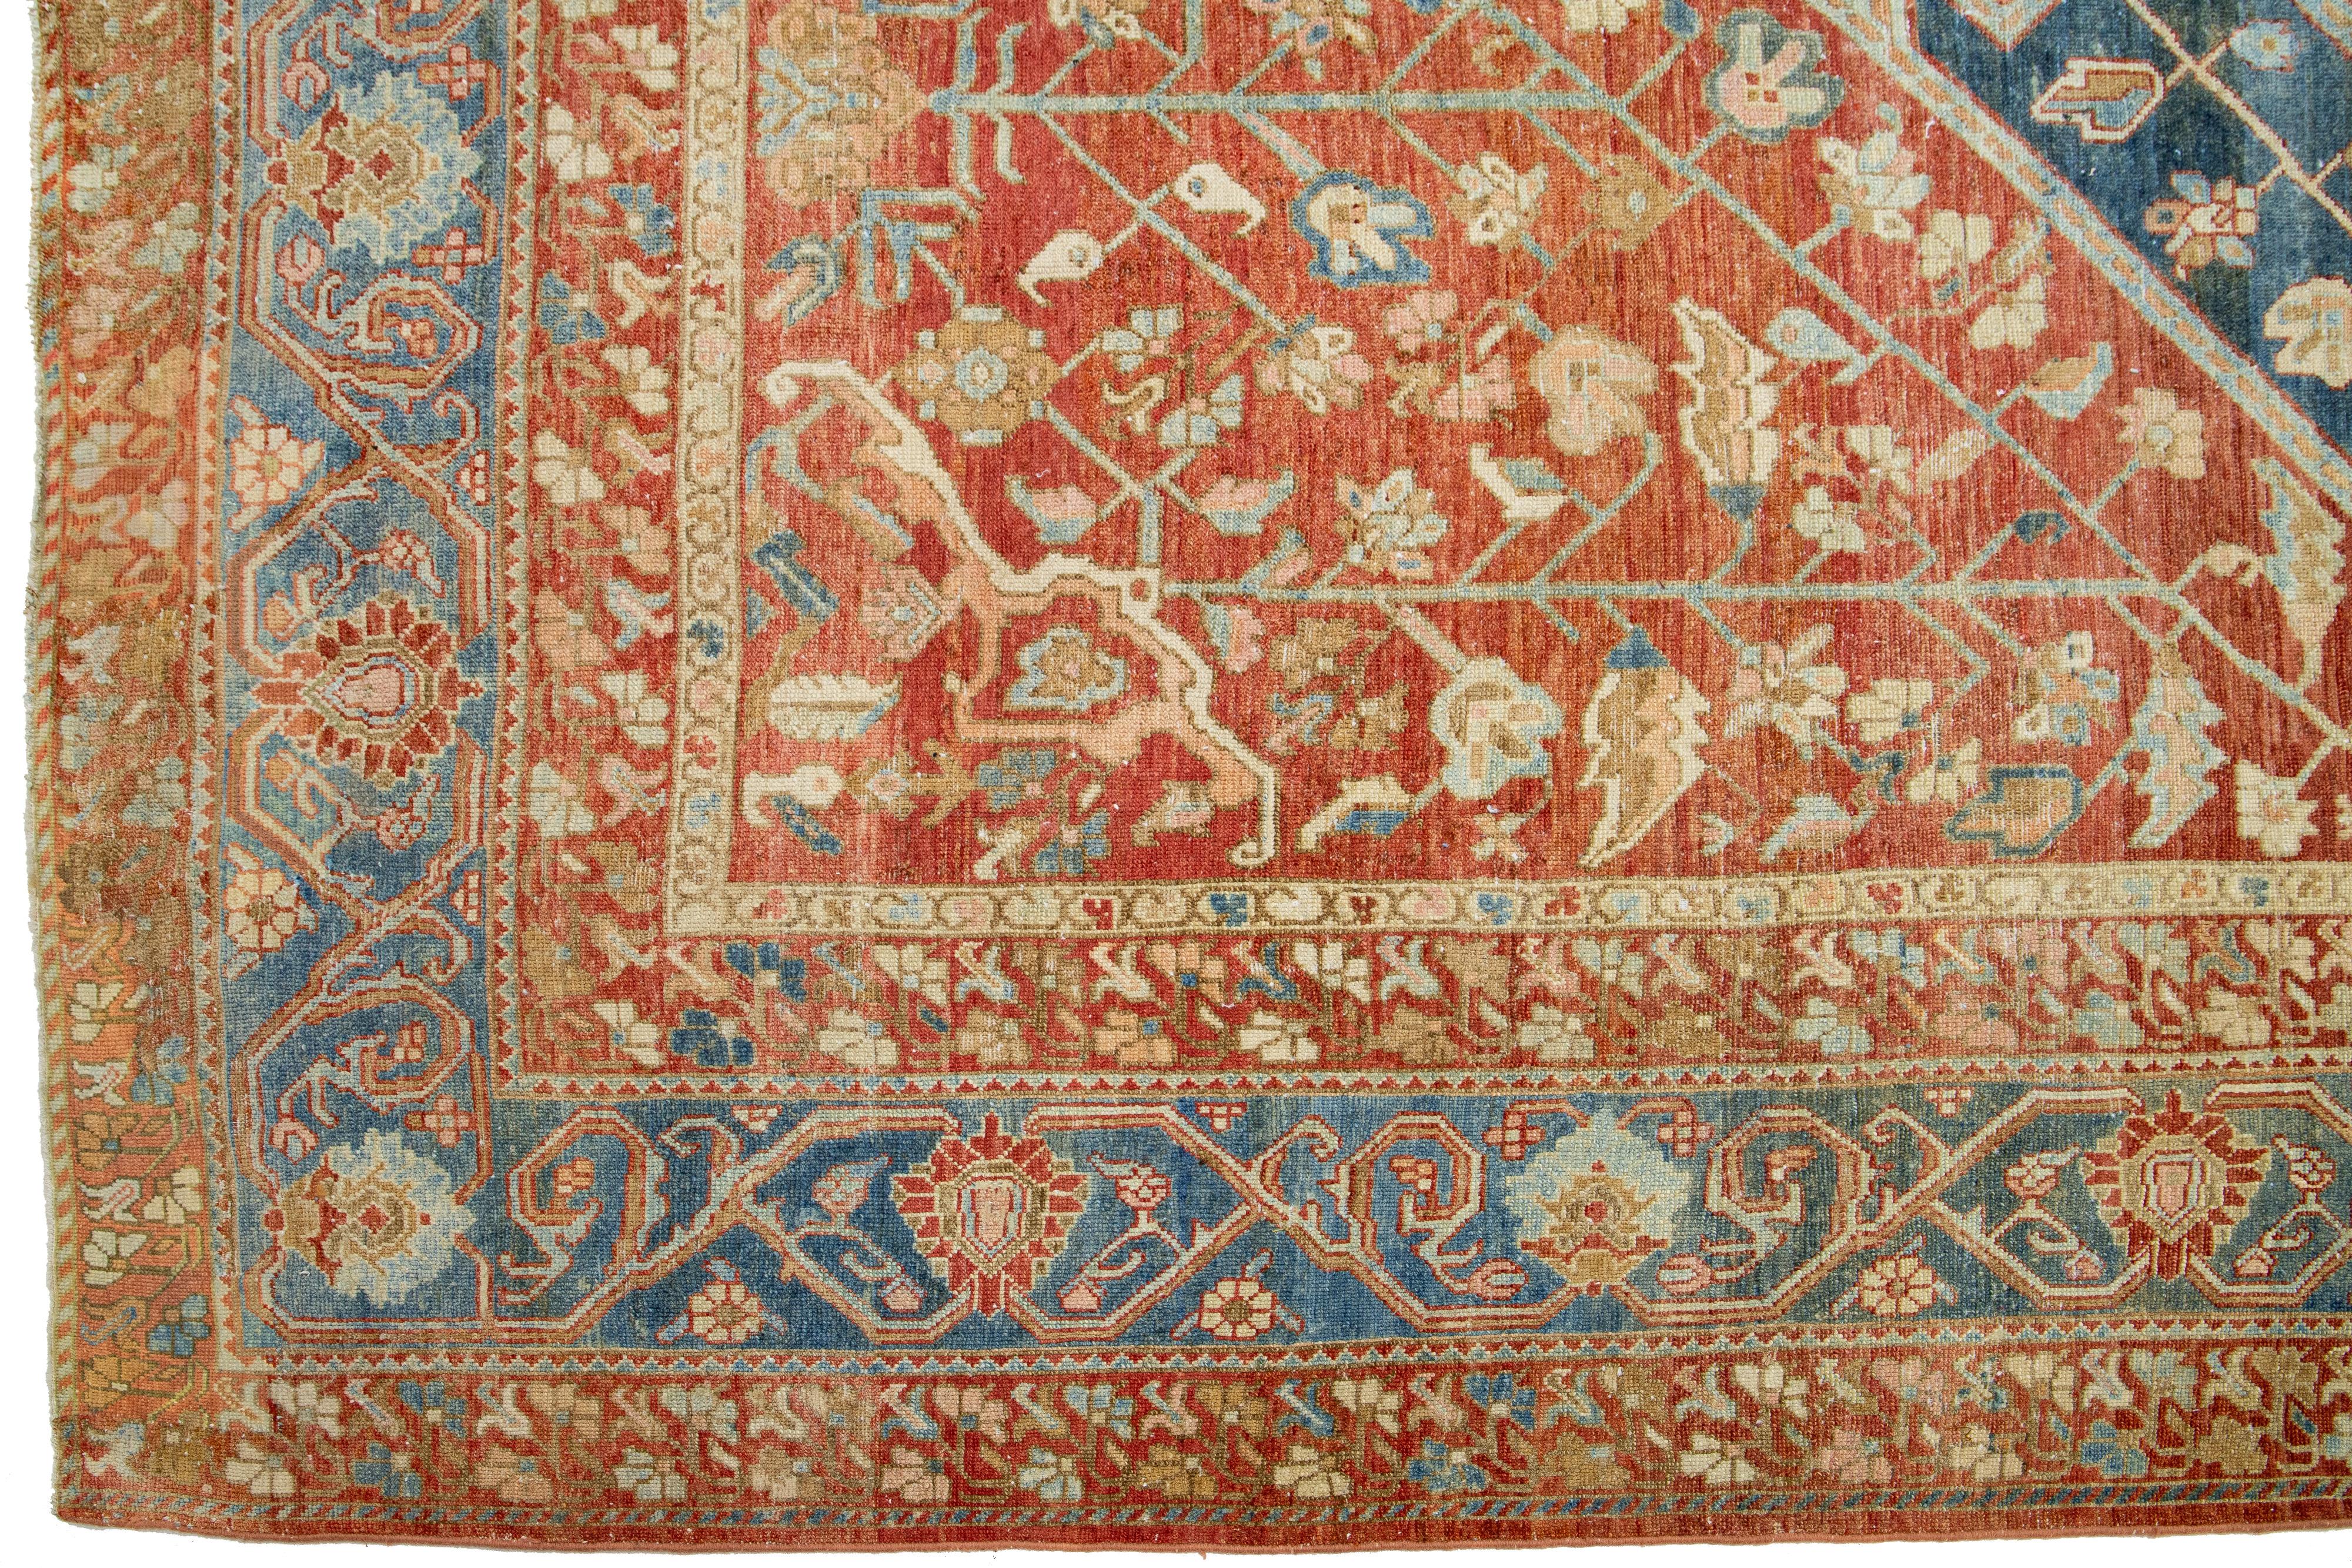 Allover 1920s Antique Persian Bakhtiari Wool Rug In Blue & Red-Rust Color  In Good Condition For Sale In Norwalk, CT